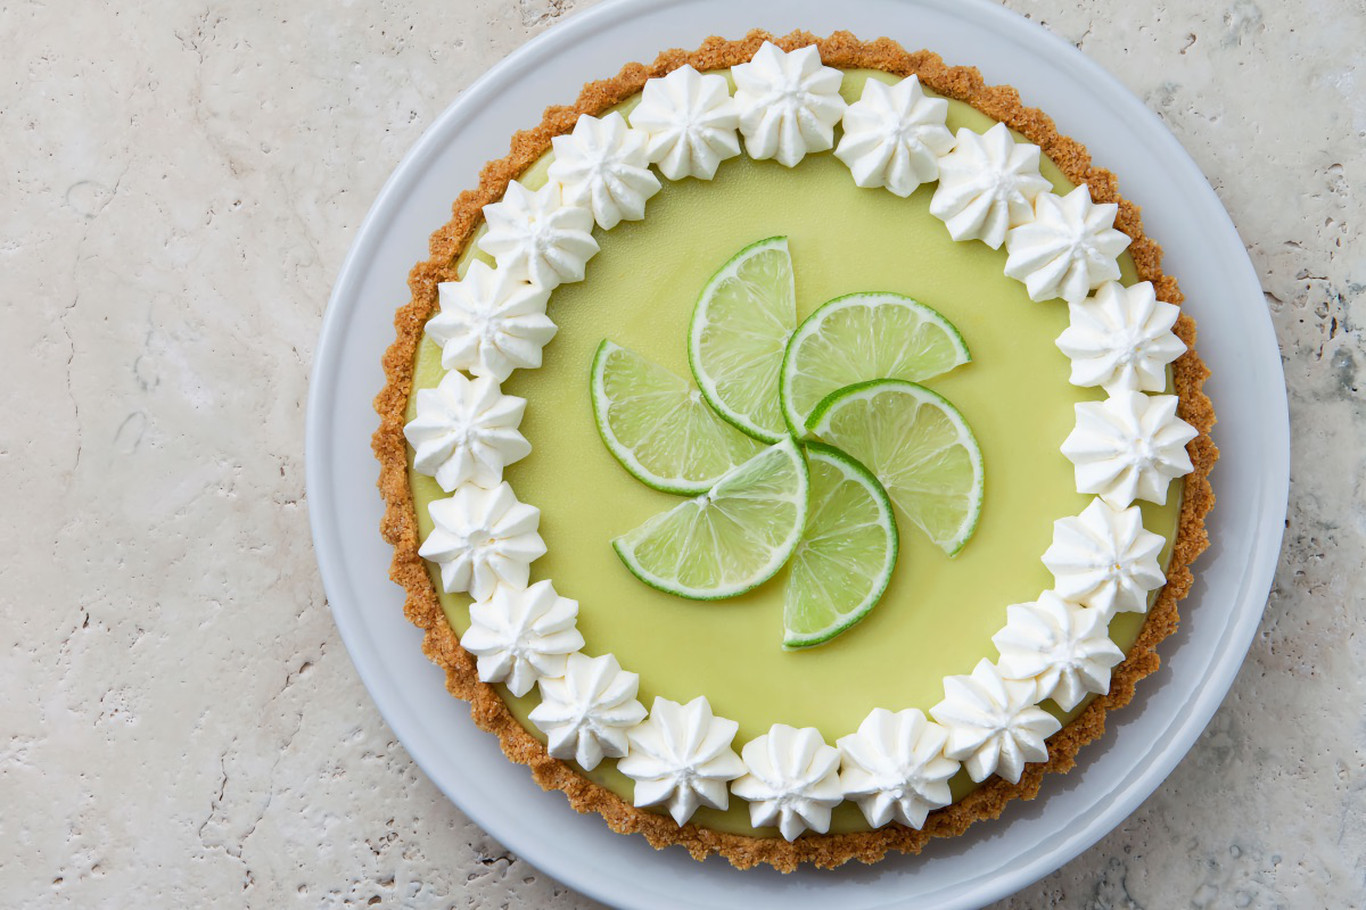 android key lime pie screenshots